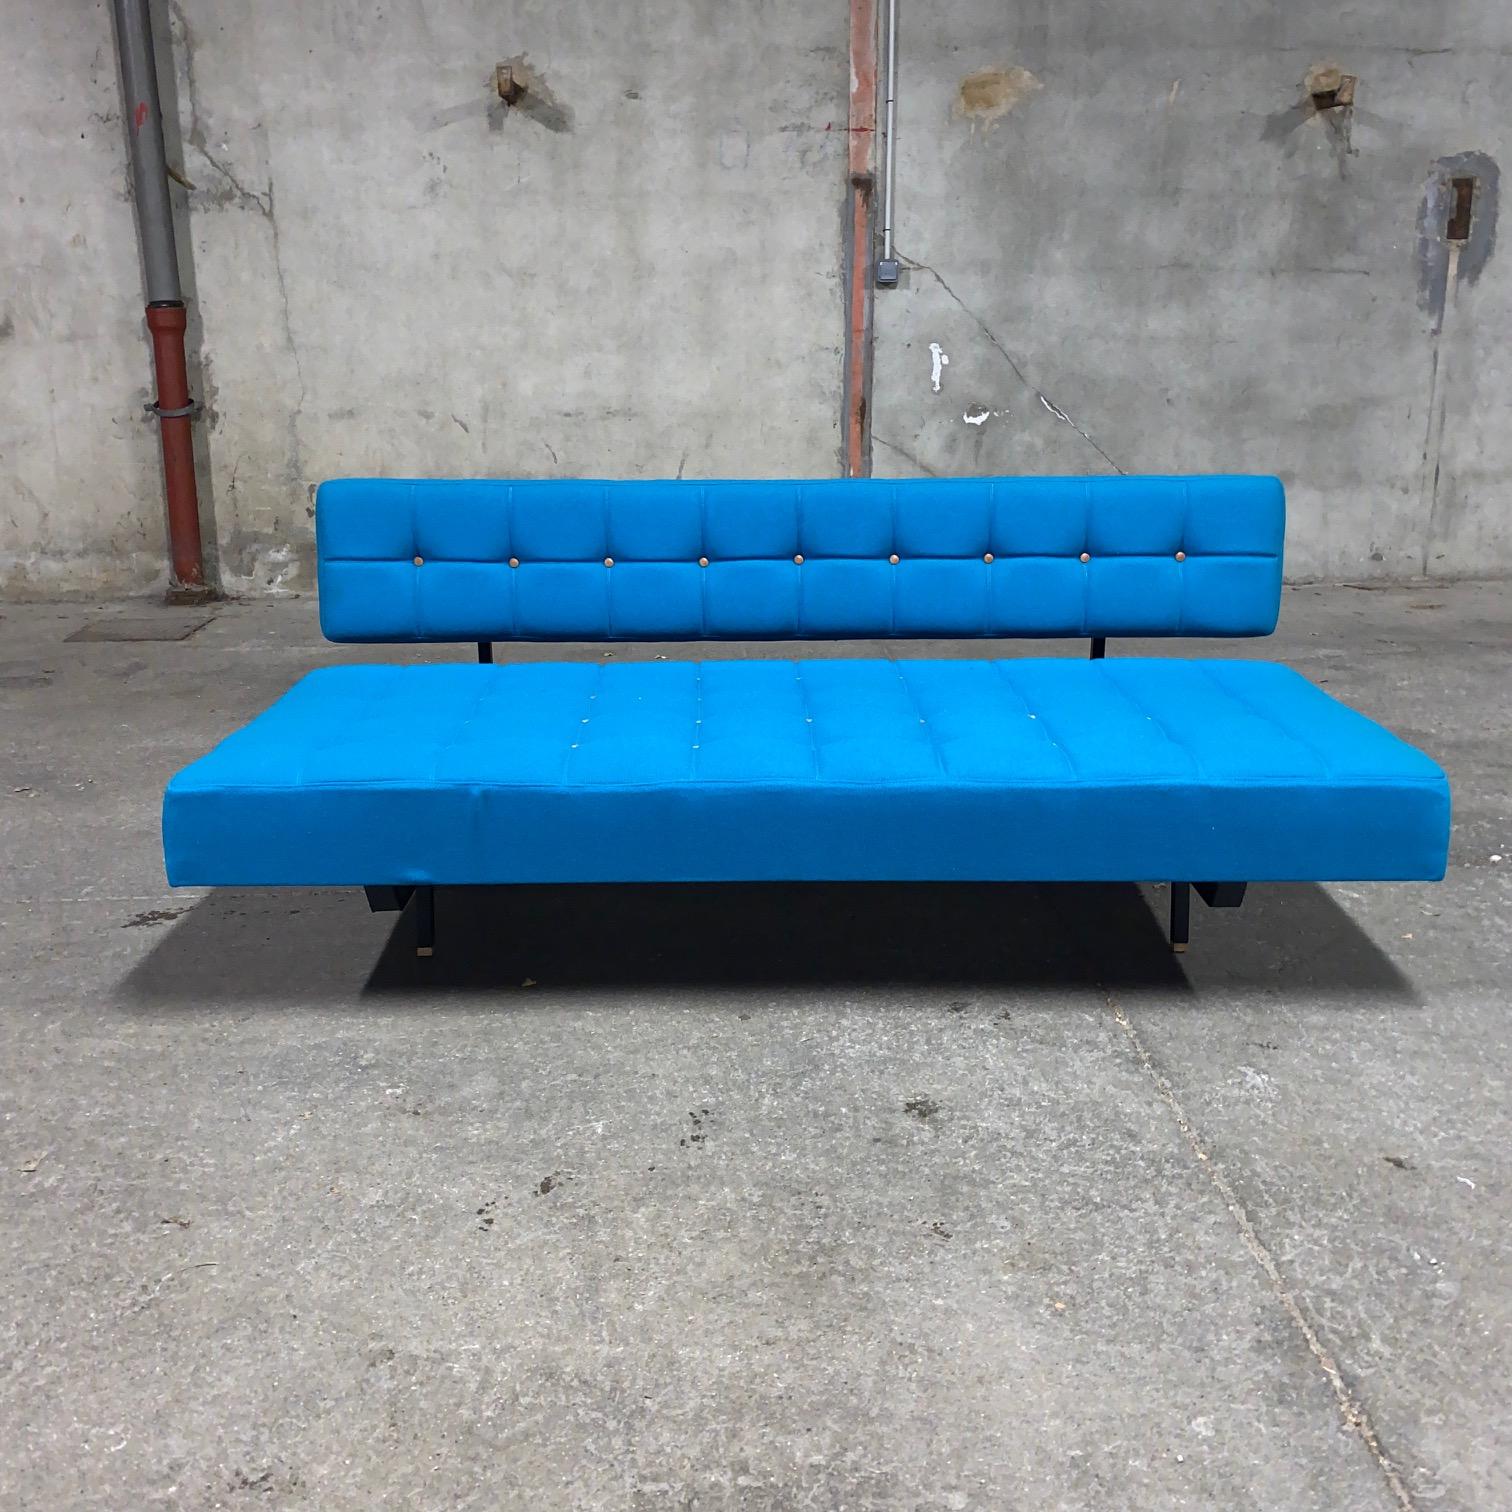 André Simard
convertible sofa daybed in wool Kvadrat fabric and articulated metal structure. 1950s edition for the Airborne brand. Refurbished. Ash toe cap
Perfect condition.